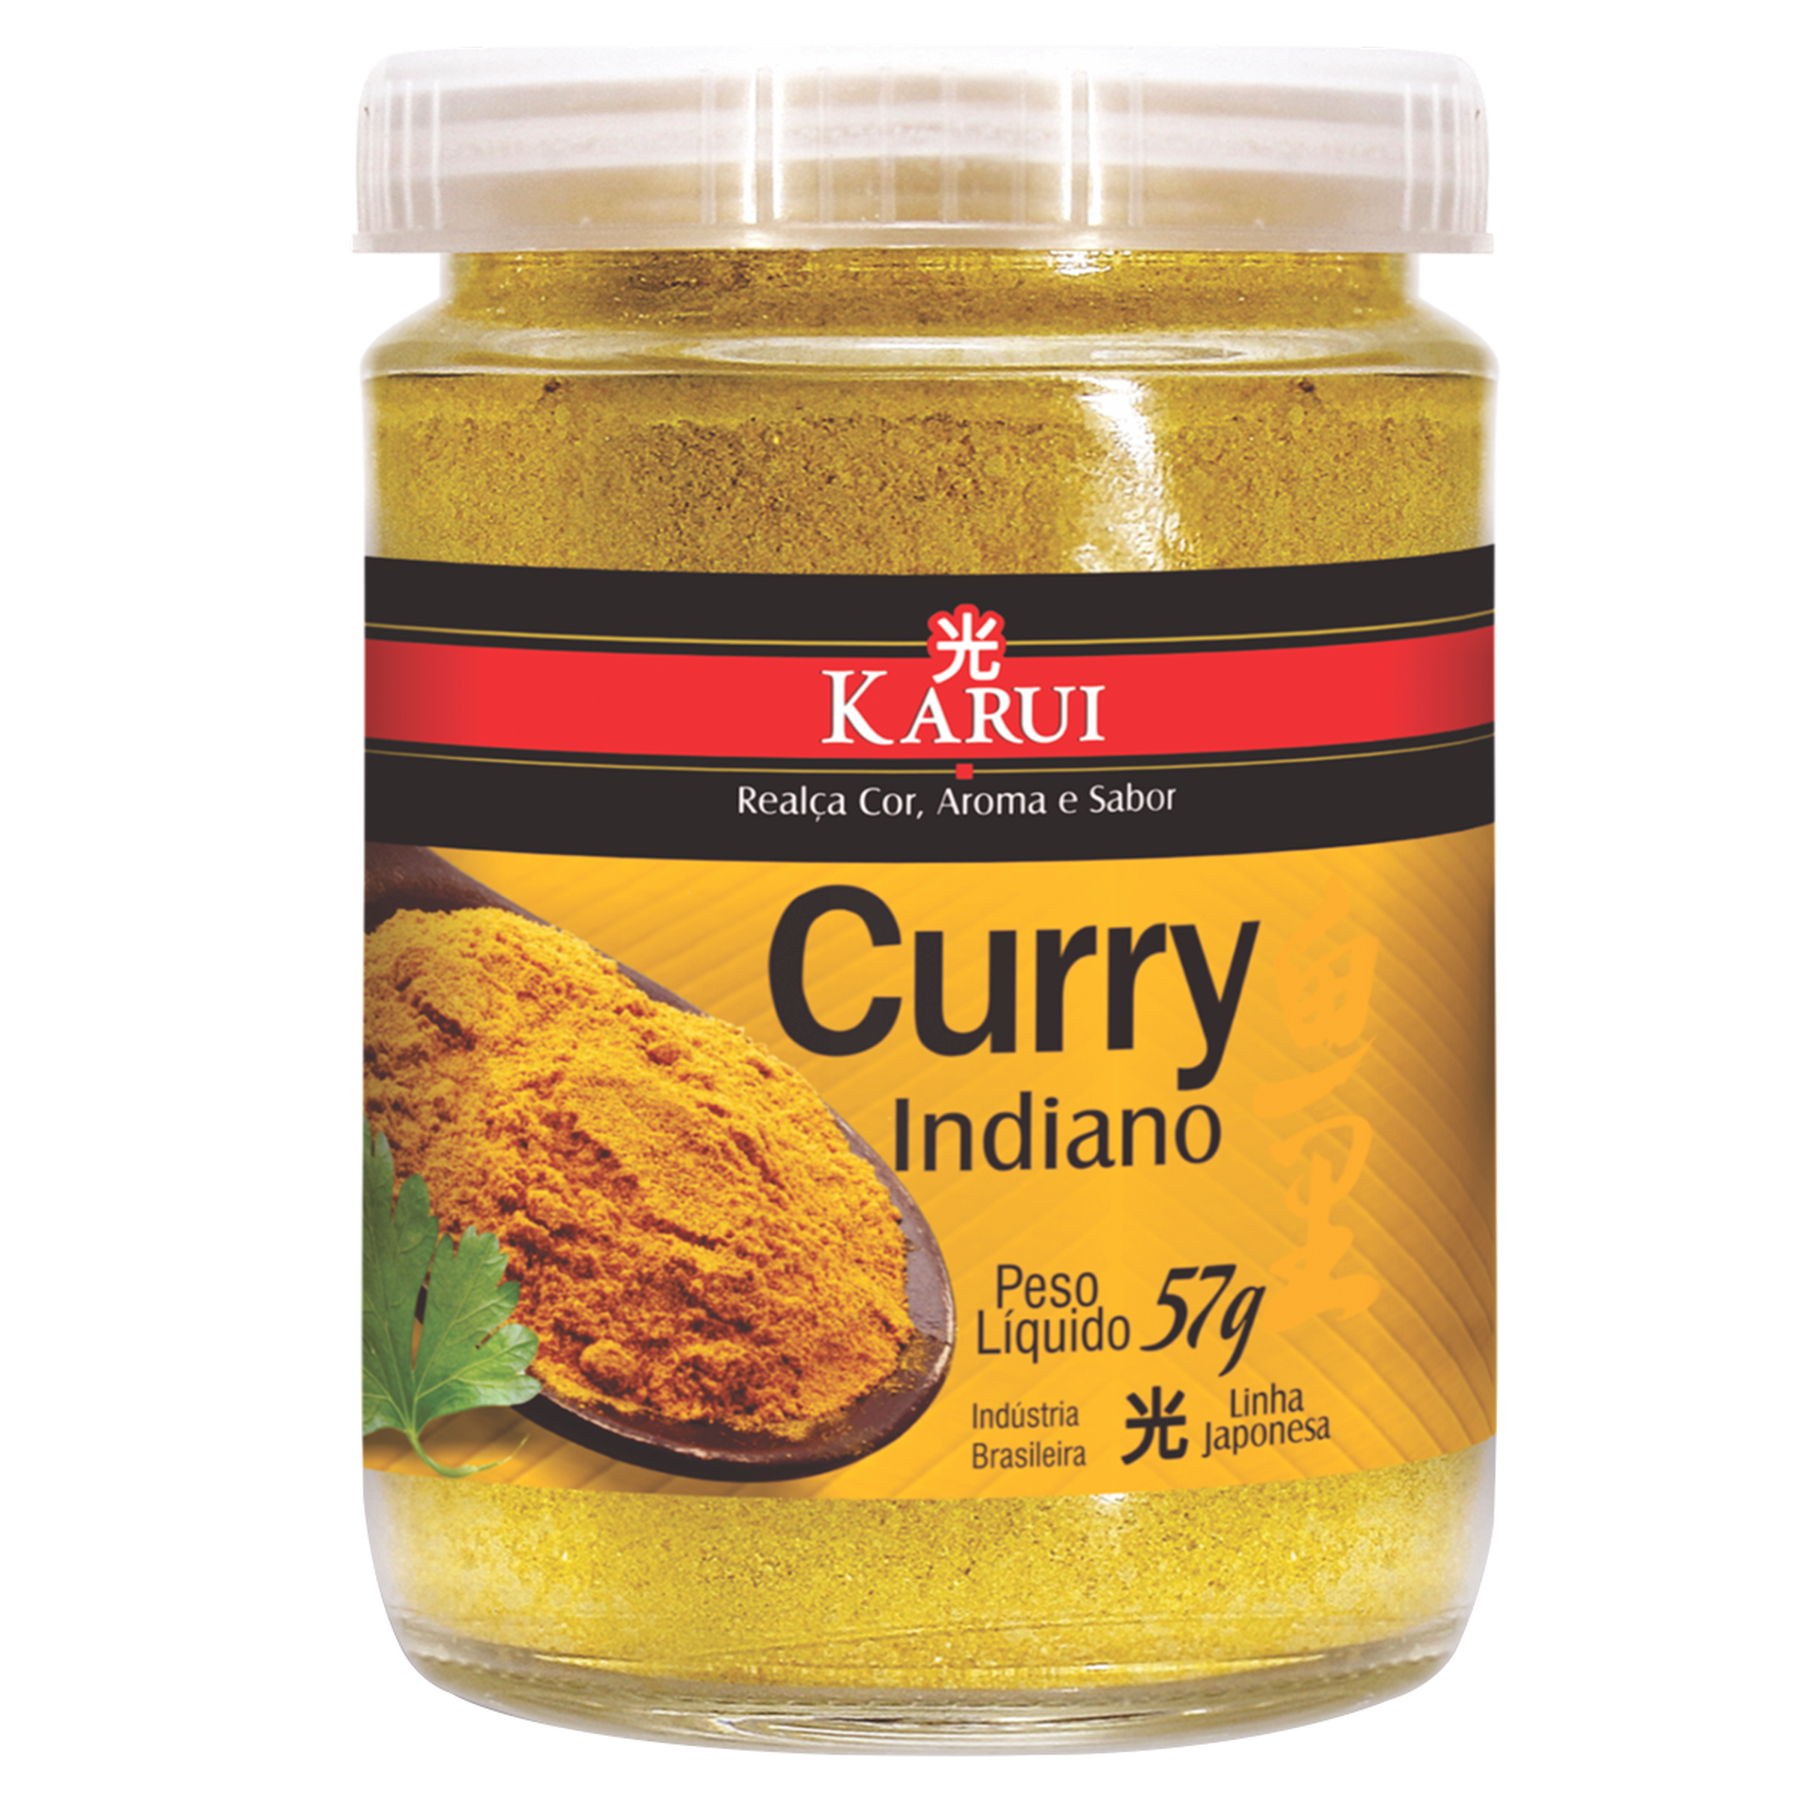 Curry Indiano Karui 70g